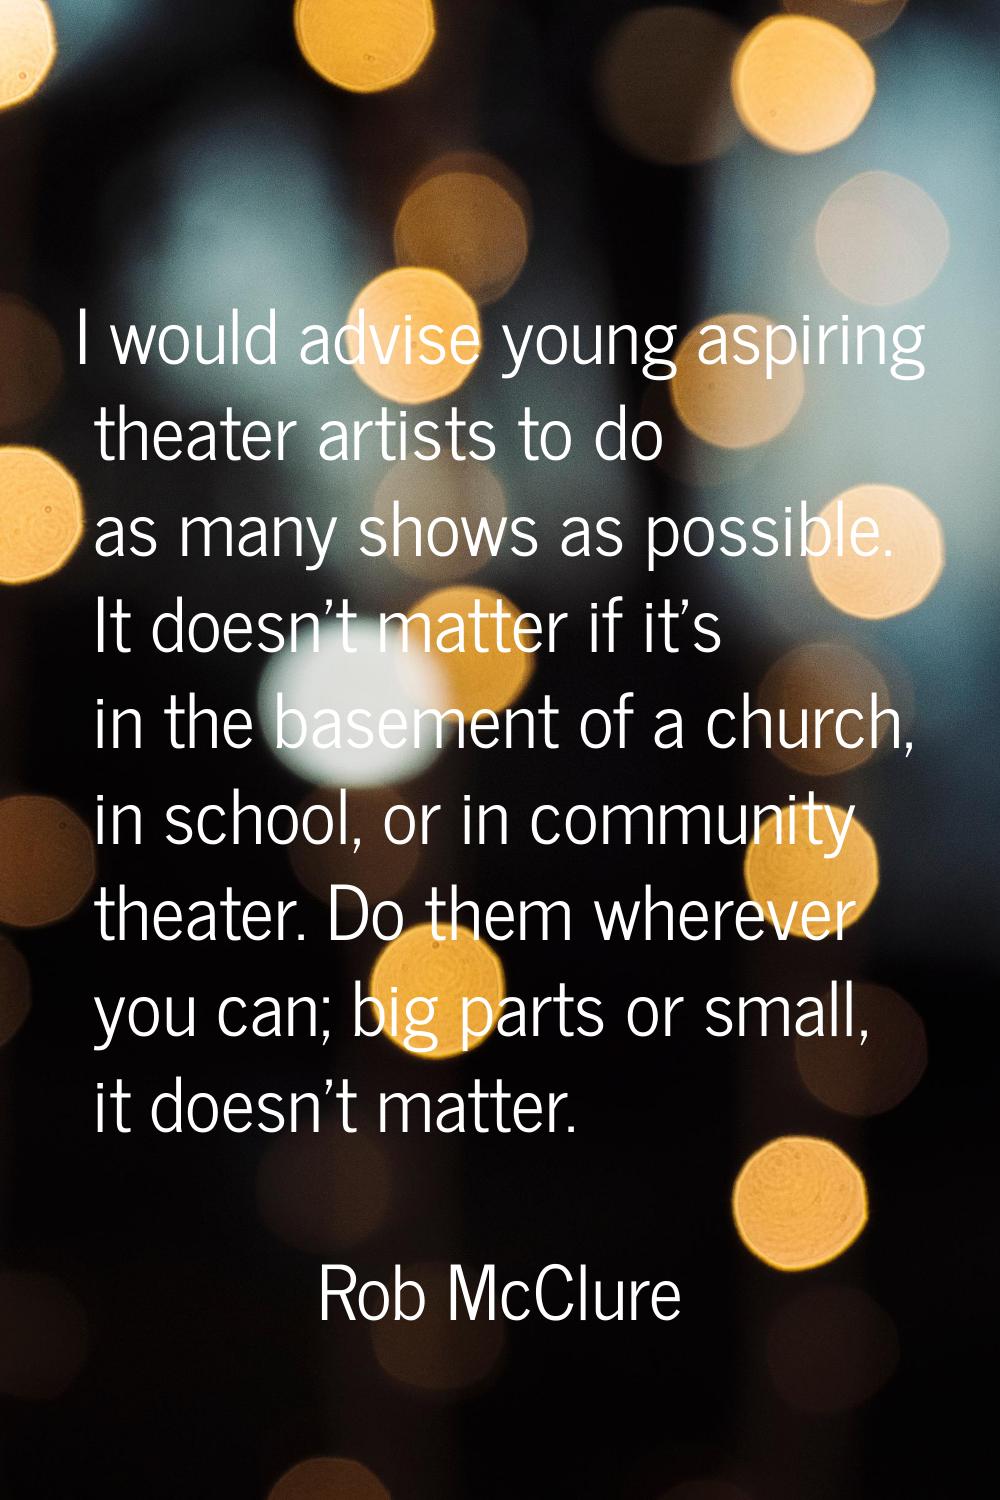 I would advise young aspiring theater artists to do as many shows as possible. It doesn't matter if